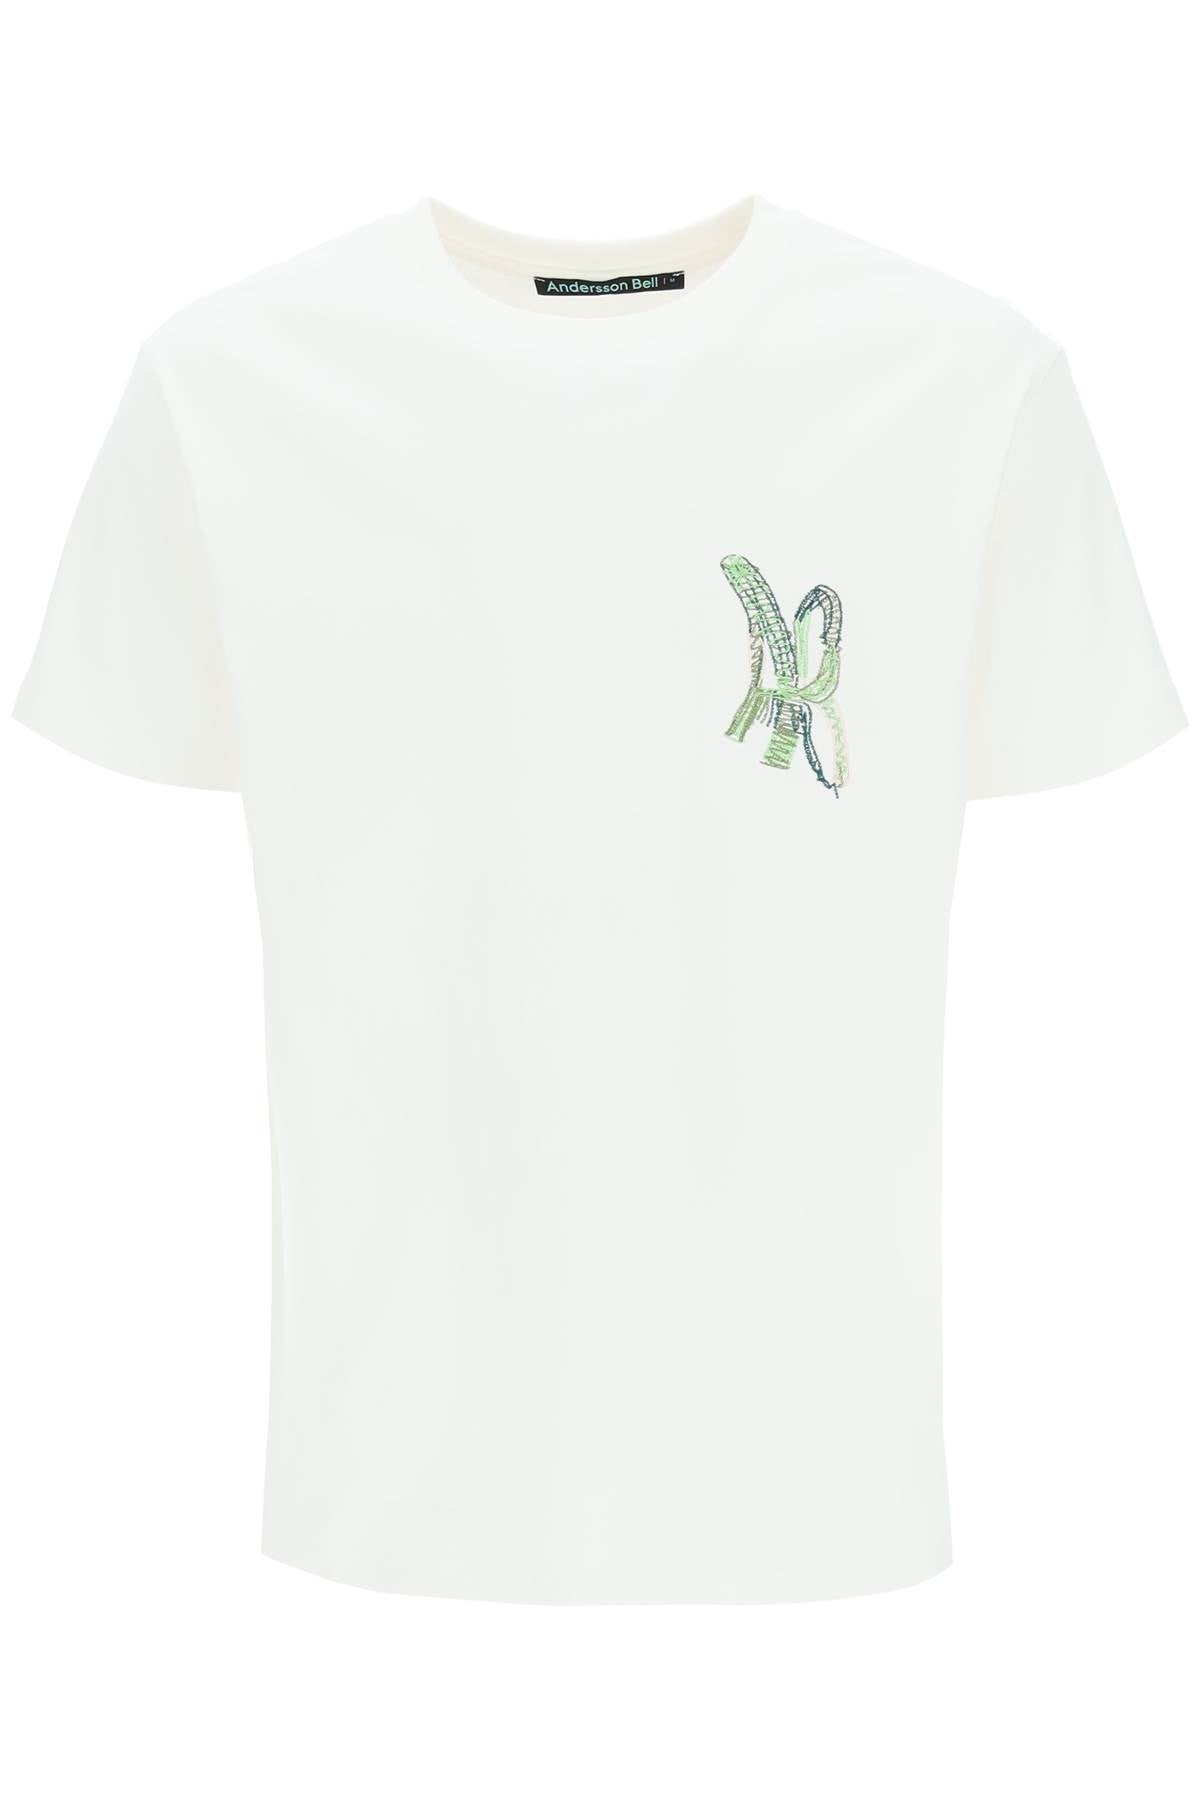 Andersson bell monogram embroidery and rear maxi print t-shirt